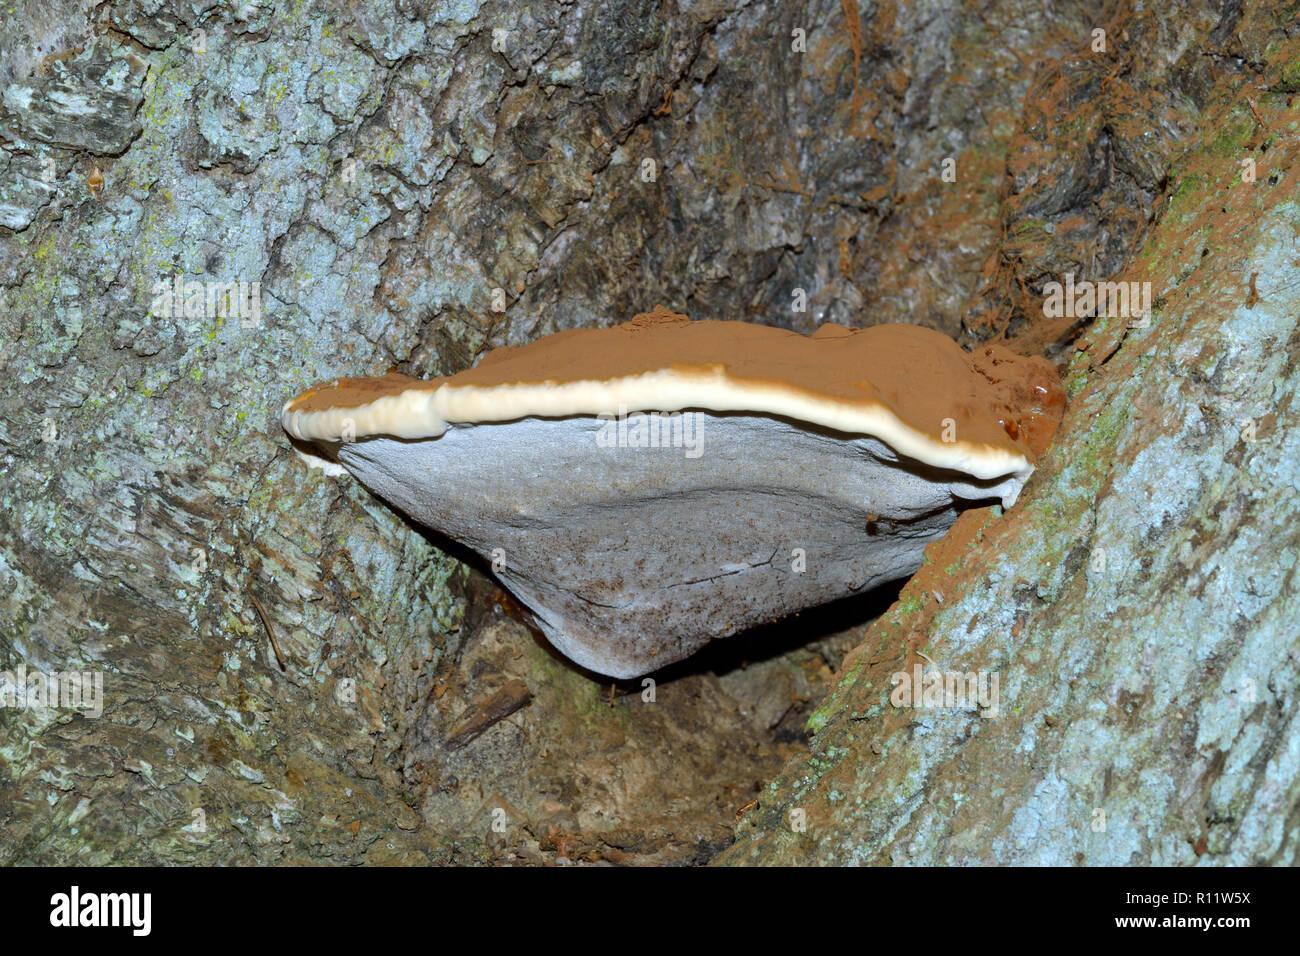 Ganoderma adspersum is a common perennial bracket fungus that causes white heart rot in certain broadleaved trees. Stock Photo